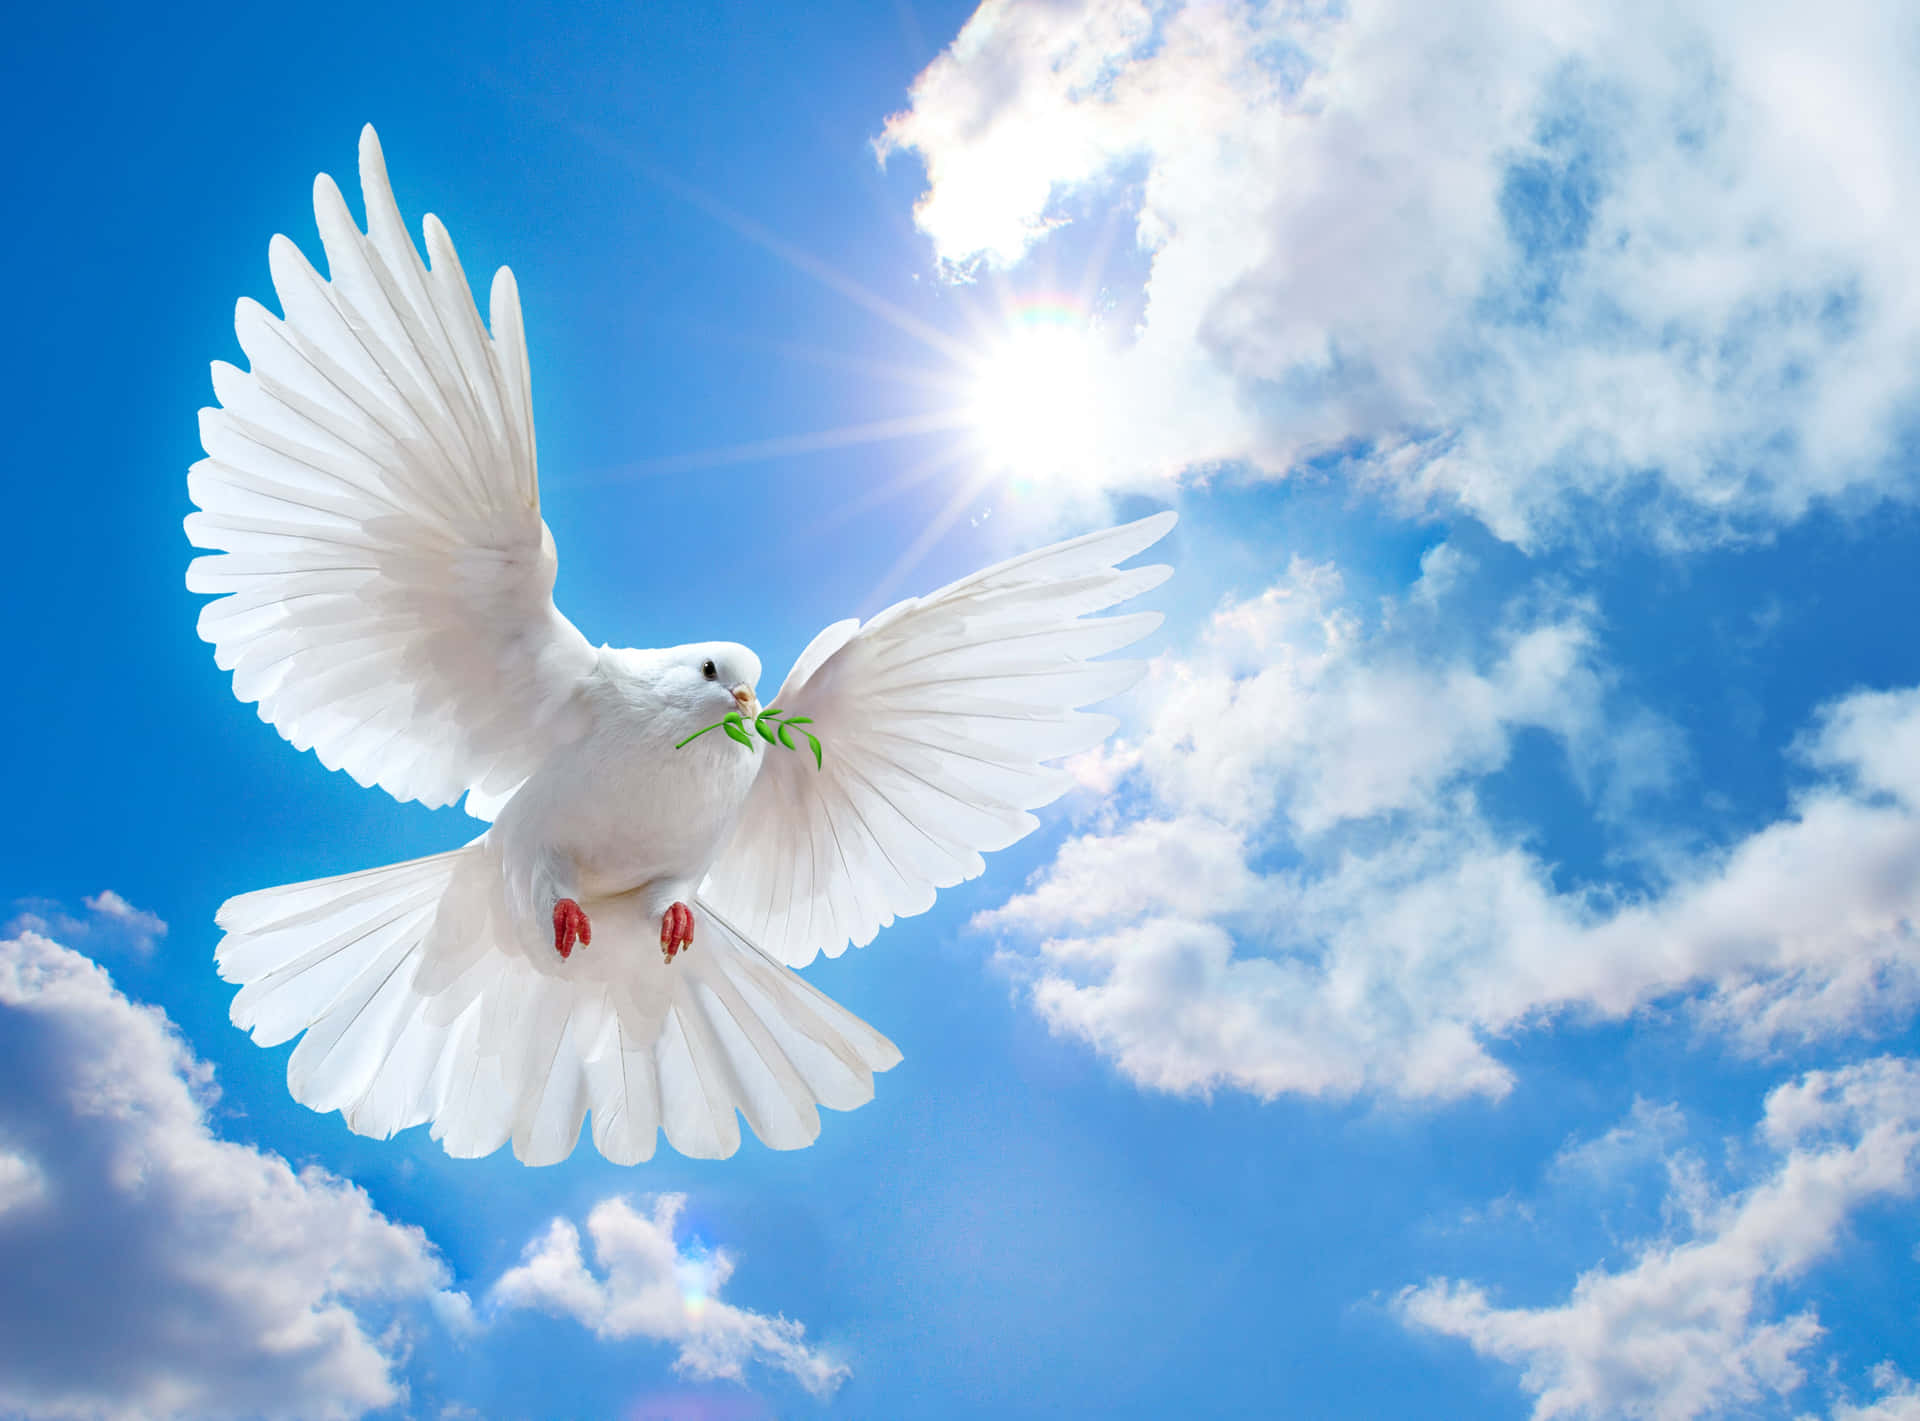 Graceful White Dove in Midair